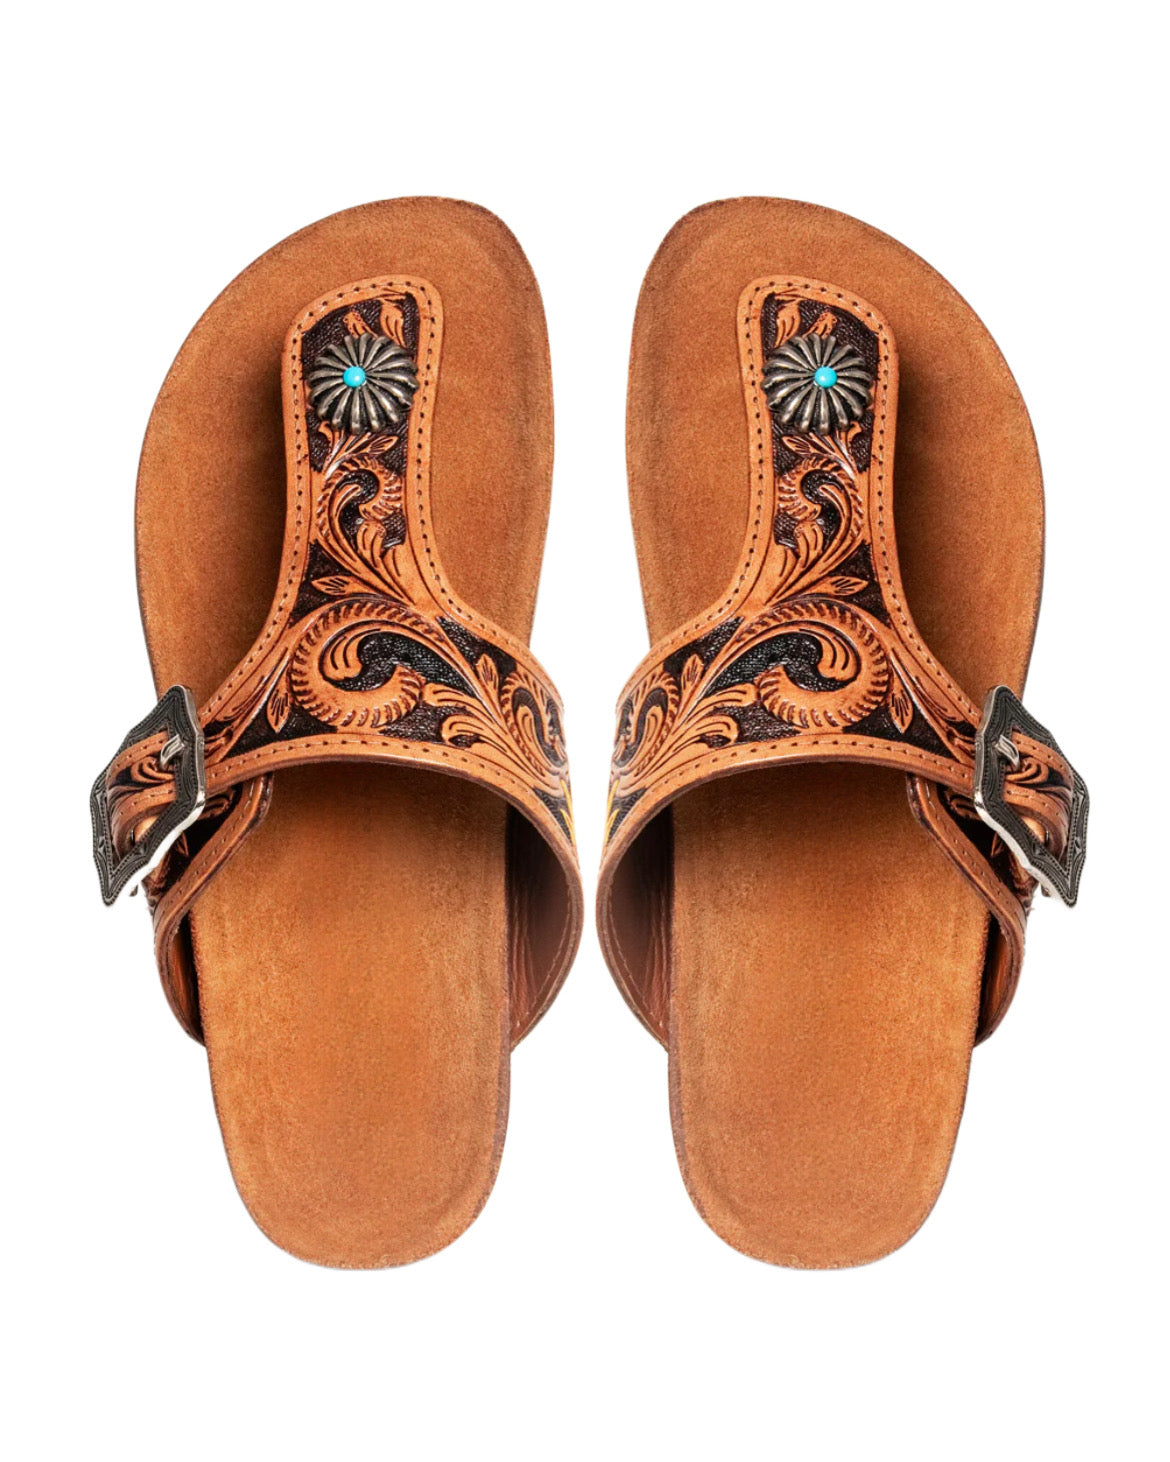 Concho Tooled Leather Sandals - Imperfectly Perfect Boutique